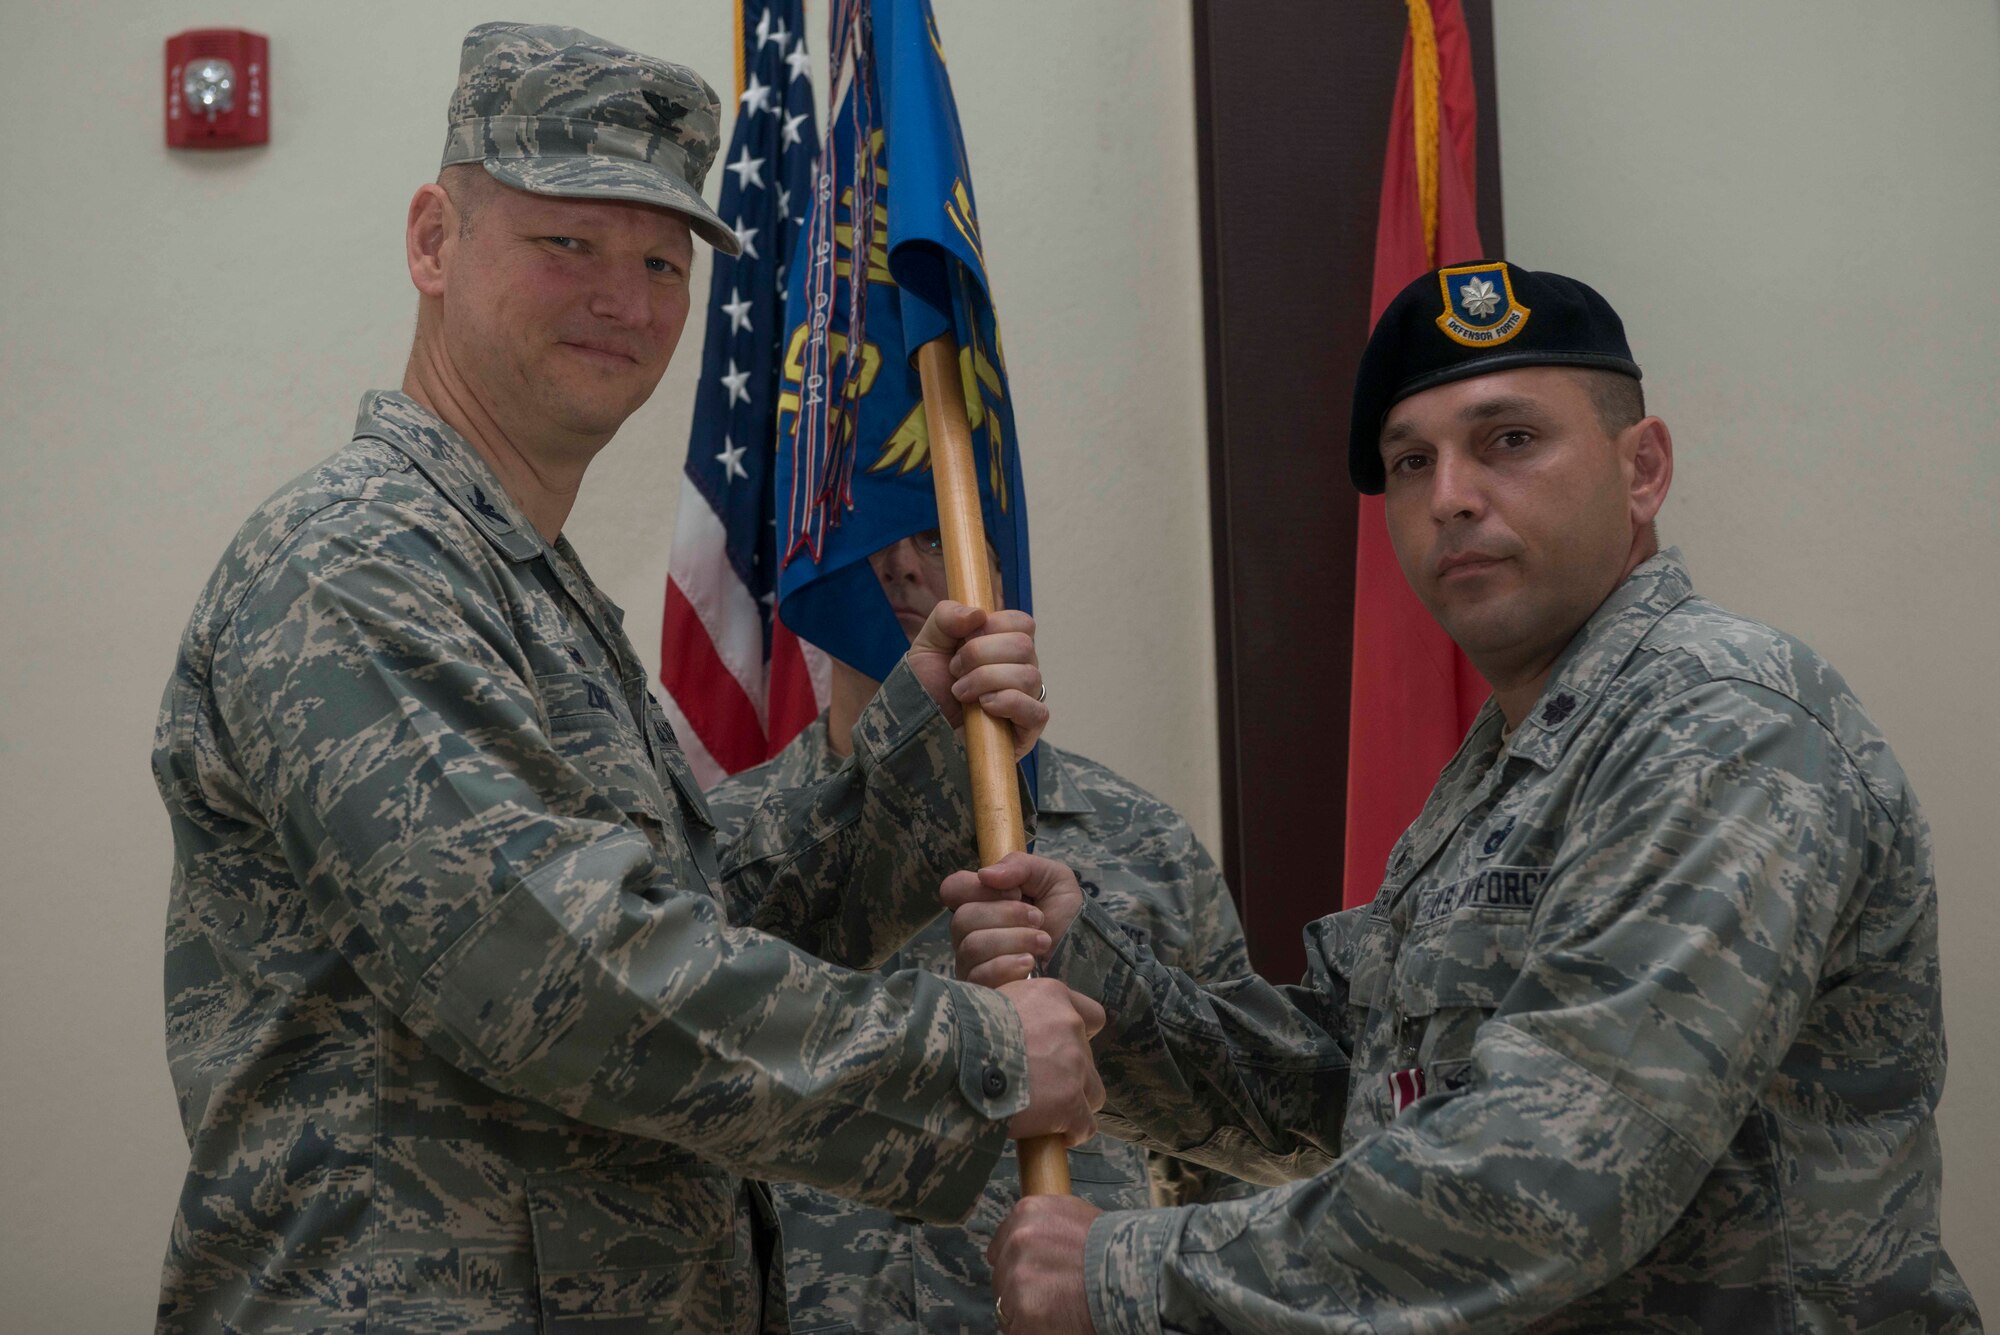 U.S. Air Force Lt. Col. Joseph Mussachia, 39th Security Forces Squadron outgoing commander, relinquishes command to U.S. Air Force Col. James, Zirkel, 39th Weapons System Security Group commander, June 24, 2016, at Incirlik Air Base, Turkey. While the 39th SFS commander, Mussachia was responsible for organizing, training and equipping more than 280 personnel. (U.S. Air Force photo by Senior Airman John Nieves Camacho/Released)